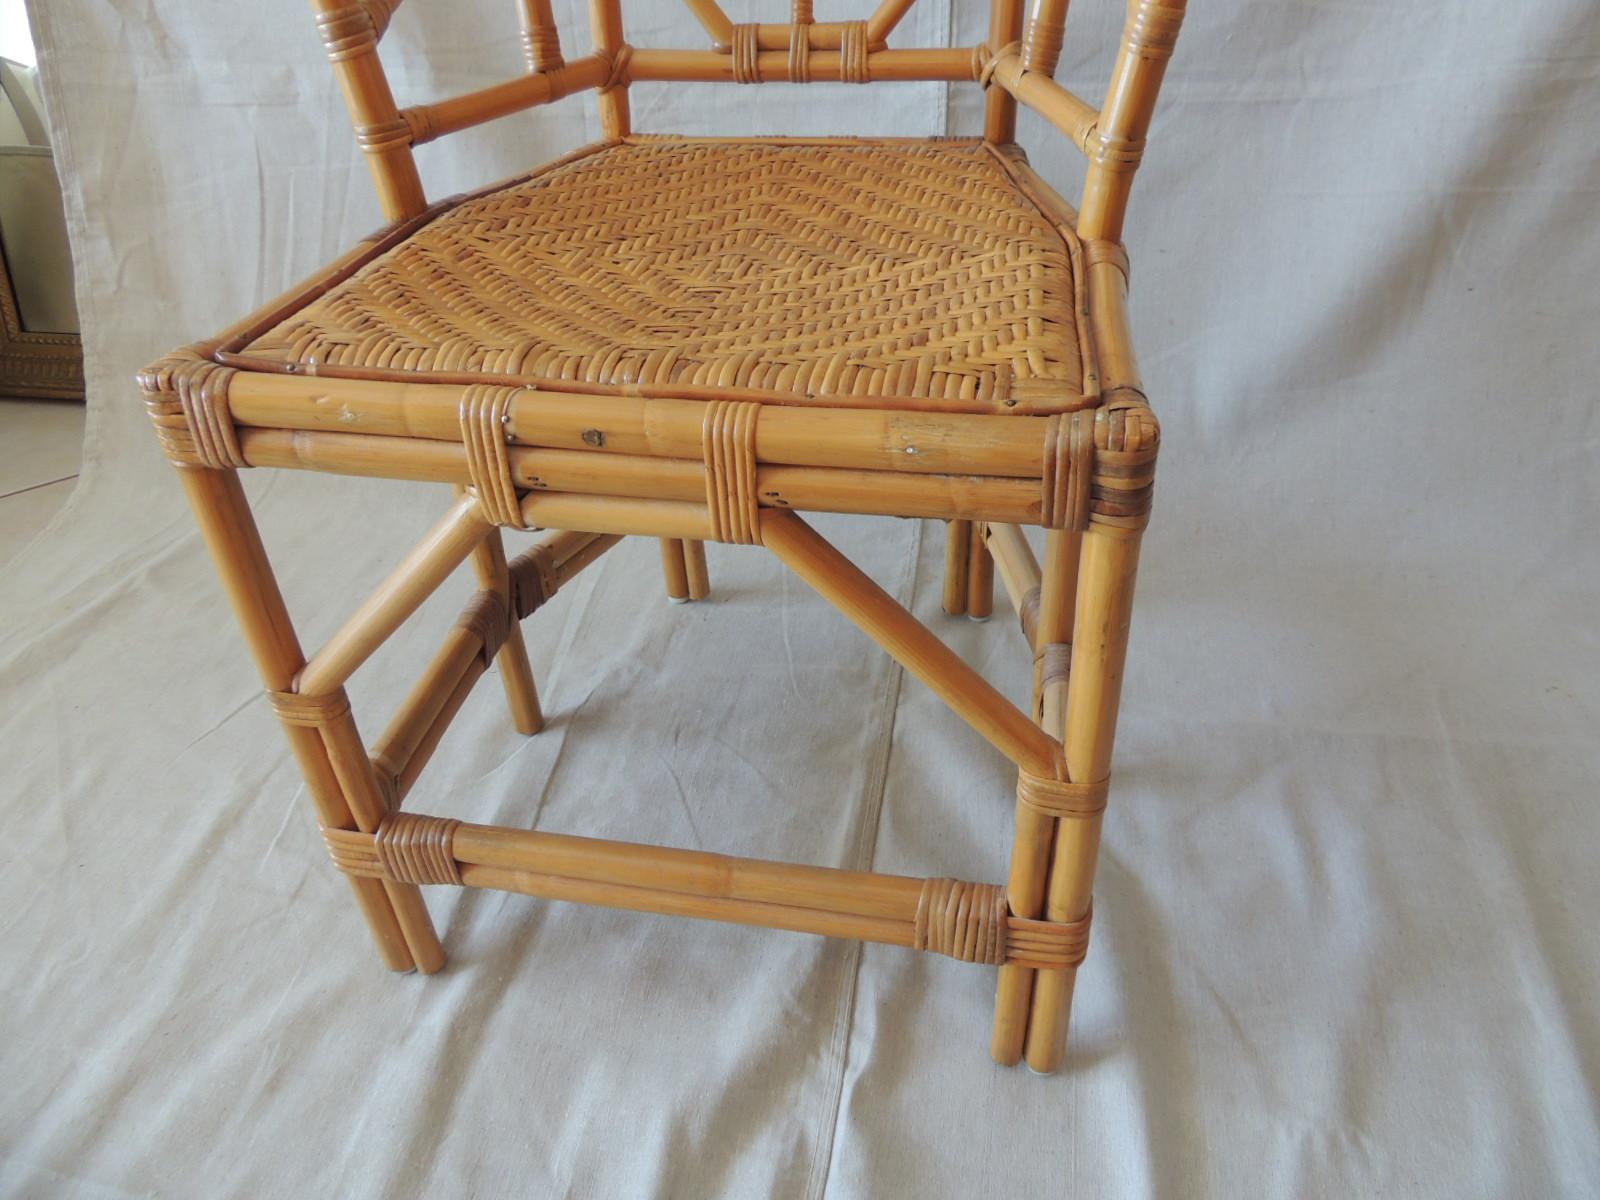 Vintage rattan and wicker chair with intricate design in the back with
six legs, semi hexagonal seat.
Woven seat.
Size: 21